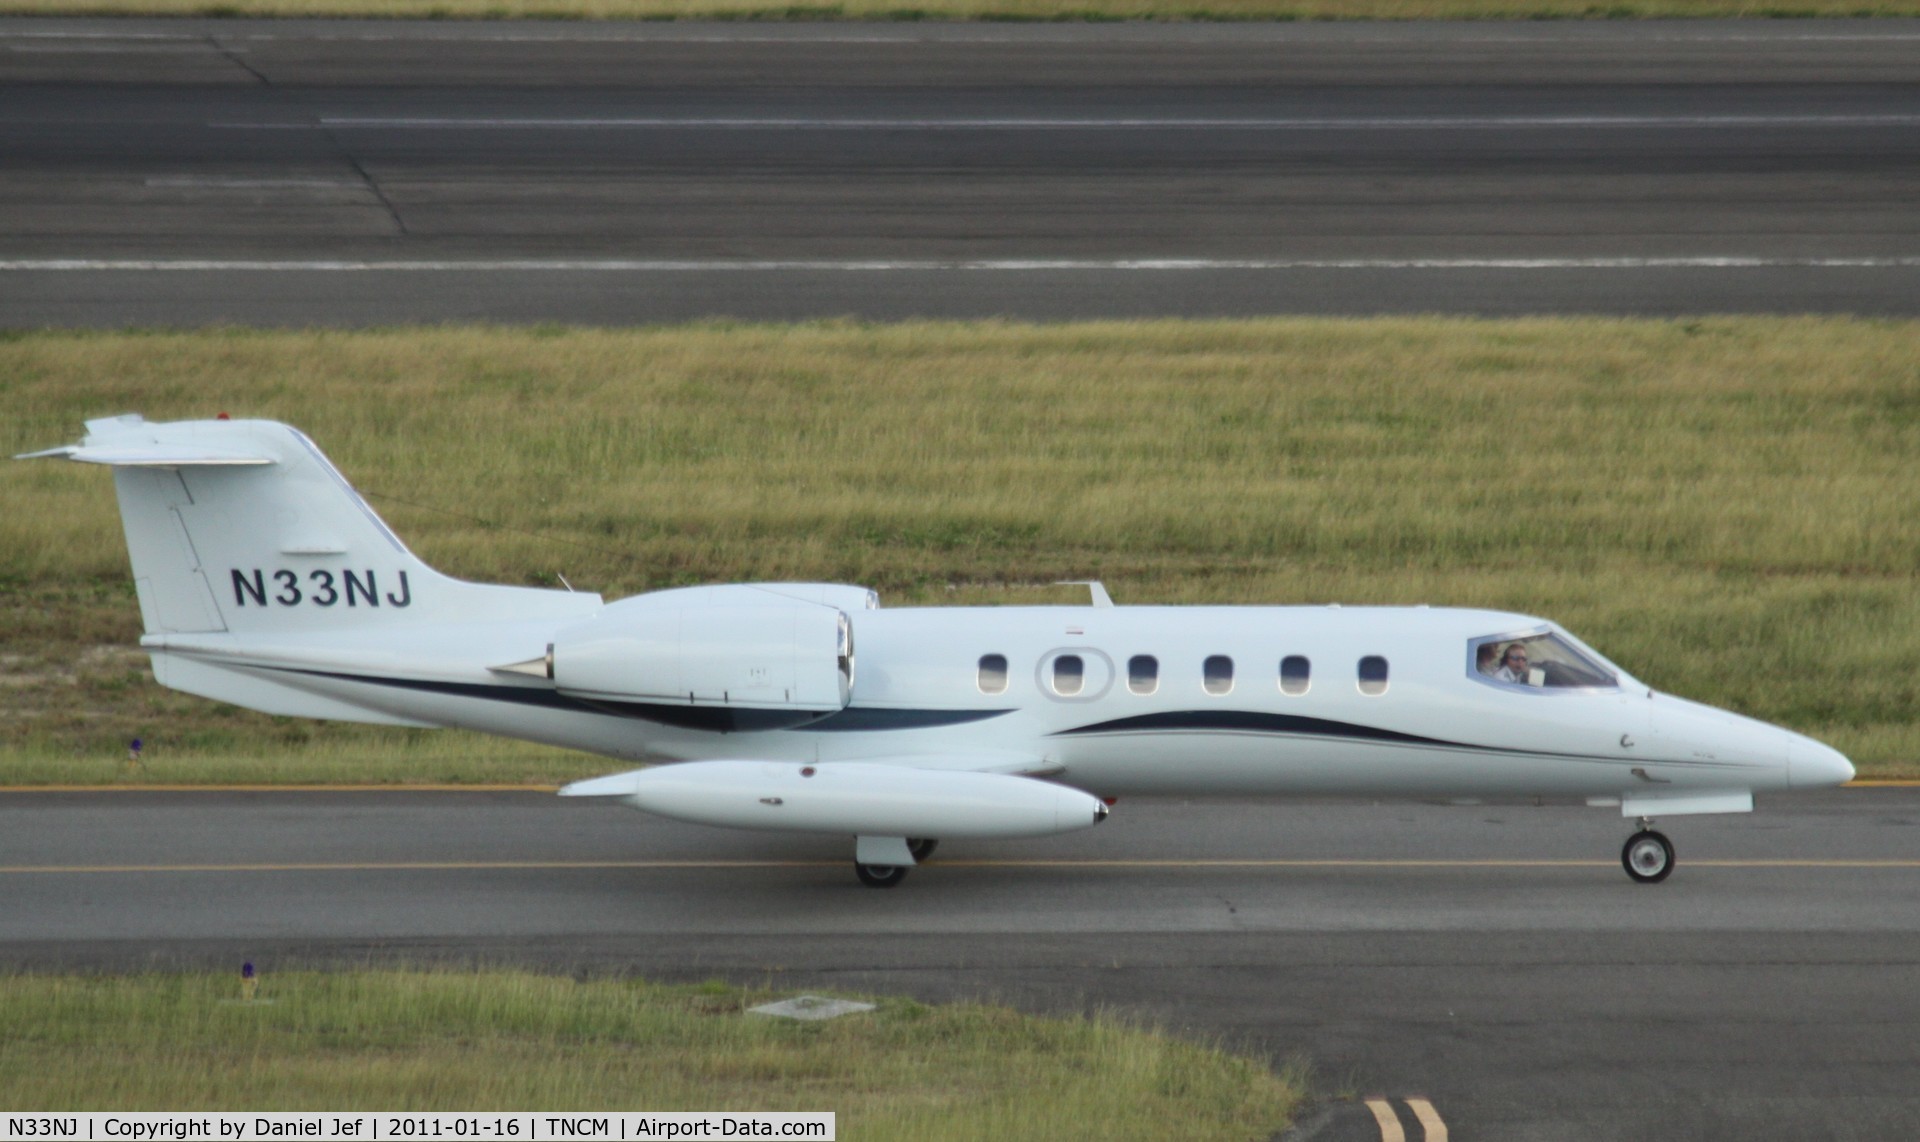 N33NJ, 1980 Gates Learjet 35A C/N 35A-305, N33NJ taxing for take off at TNCM